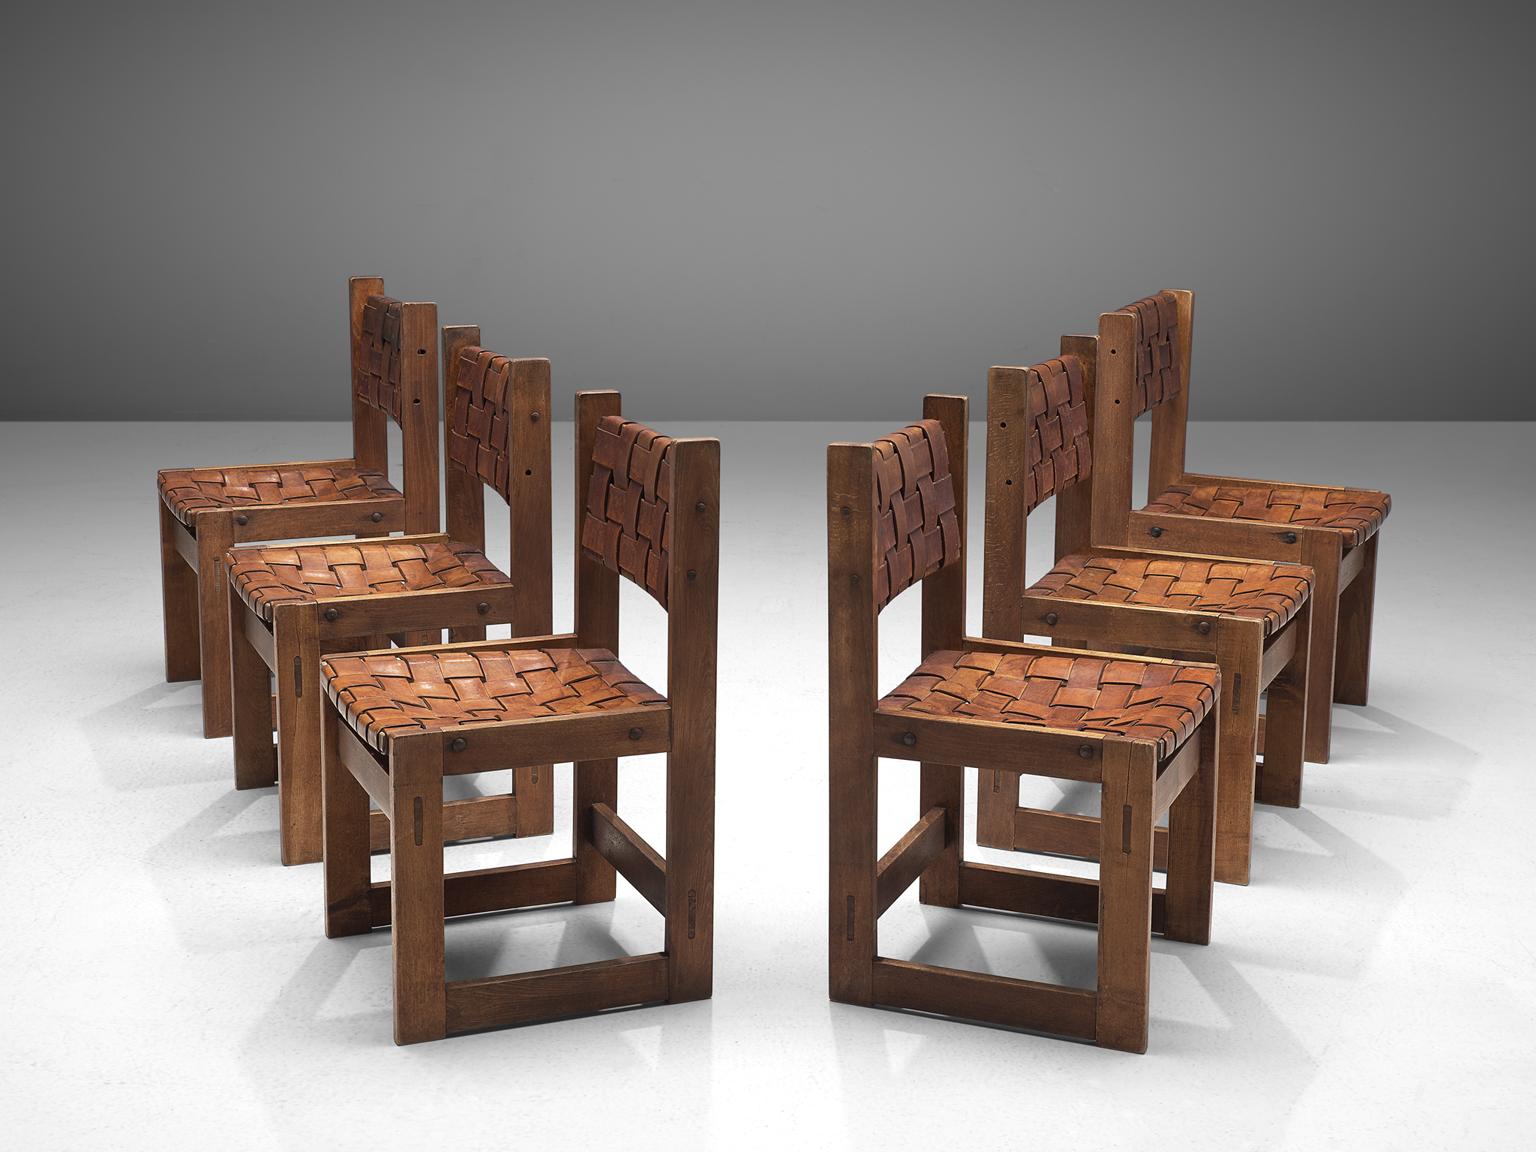 Set of 6 dining chairs, elmwood and patinated leather, Scandinavia, 1922.

A set of midcentury dining chairs in thick saddle leather. The woven seats and backrests consist of cognac leather straps that aged beautifully, resulting in an admirable